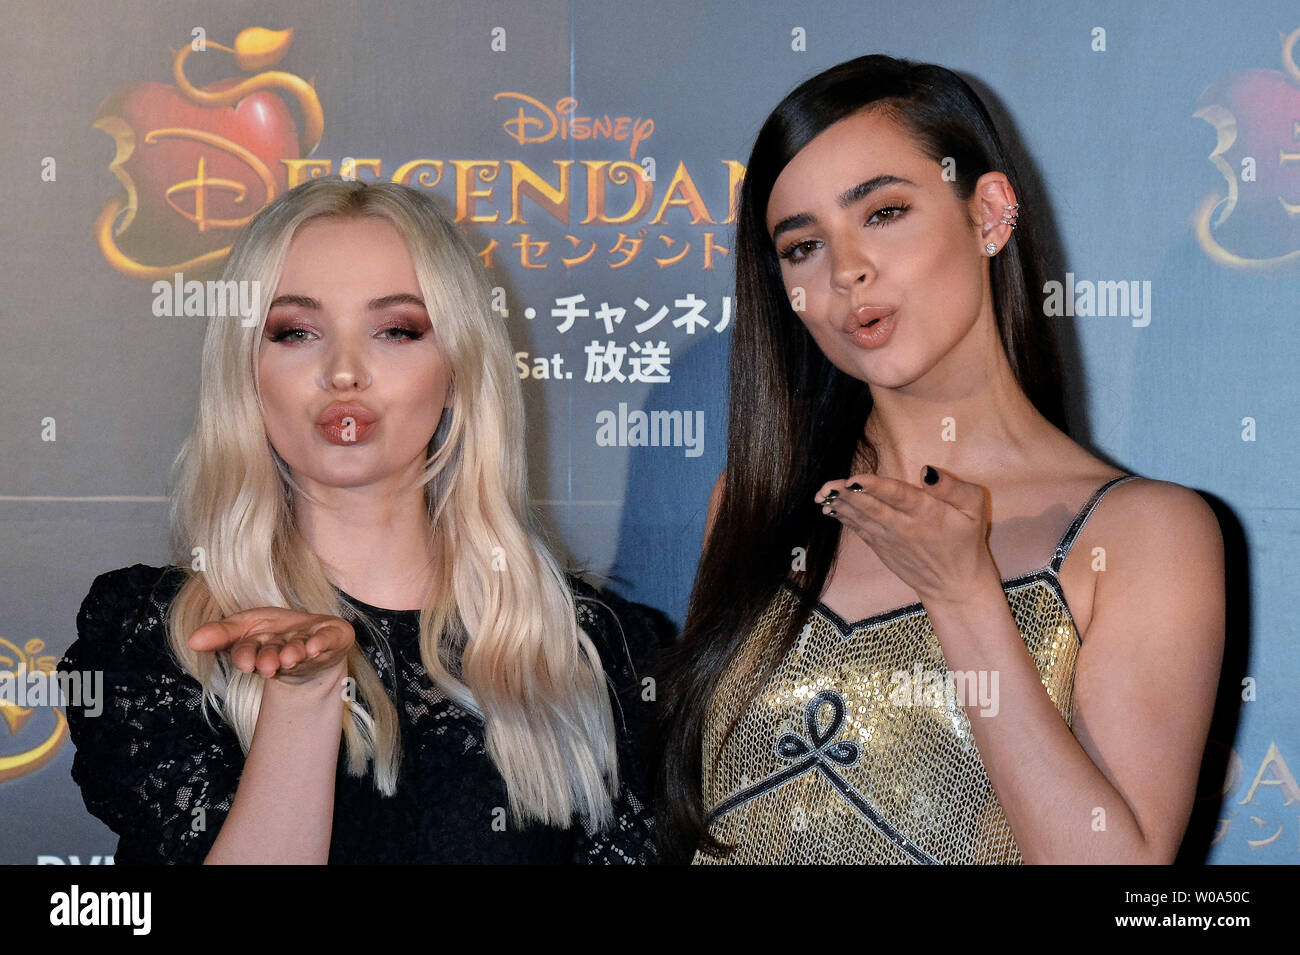 Actress Dove Cameronl And Sofia Carson Attend The Event For Disney